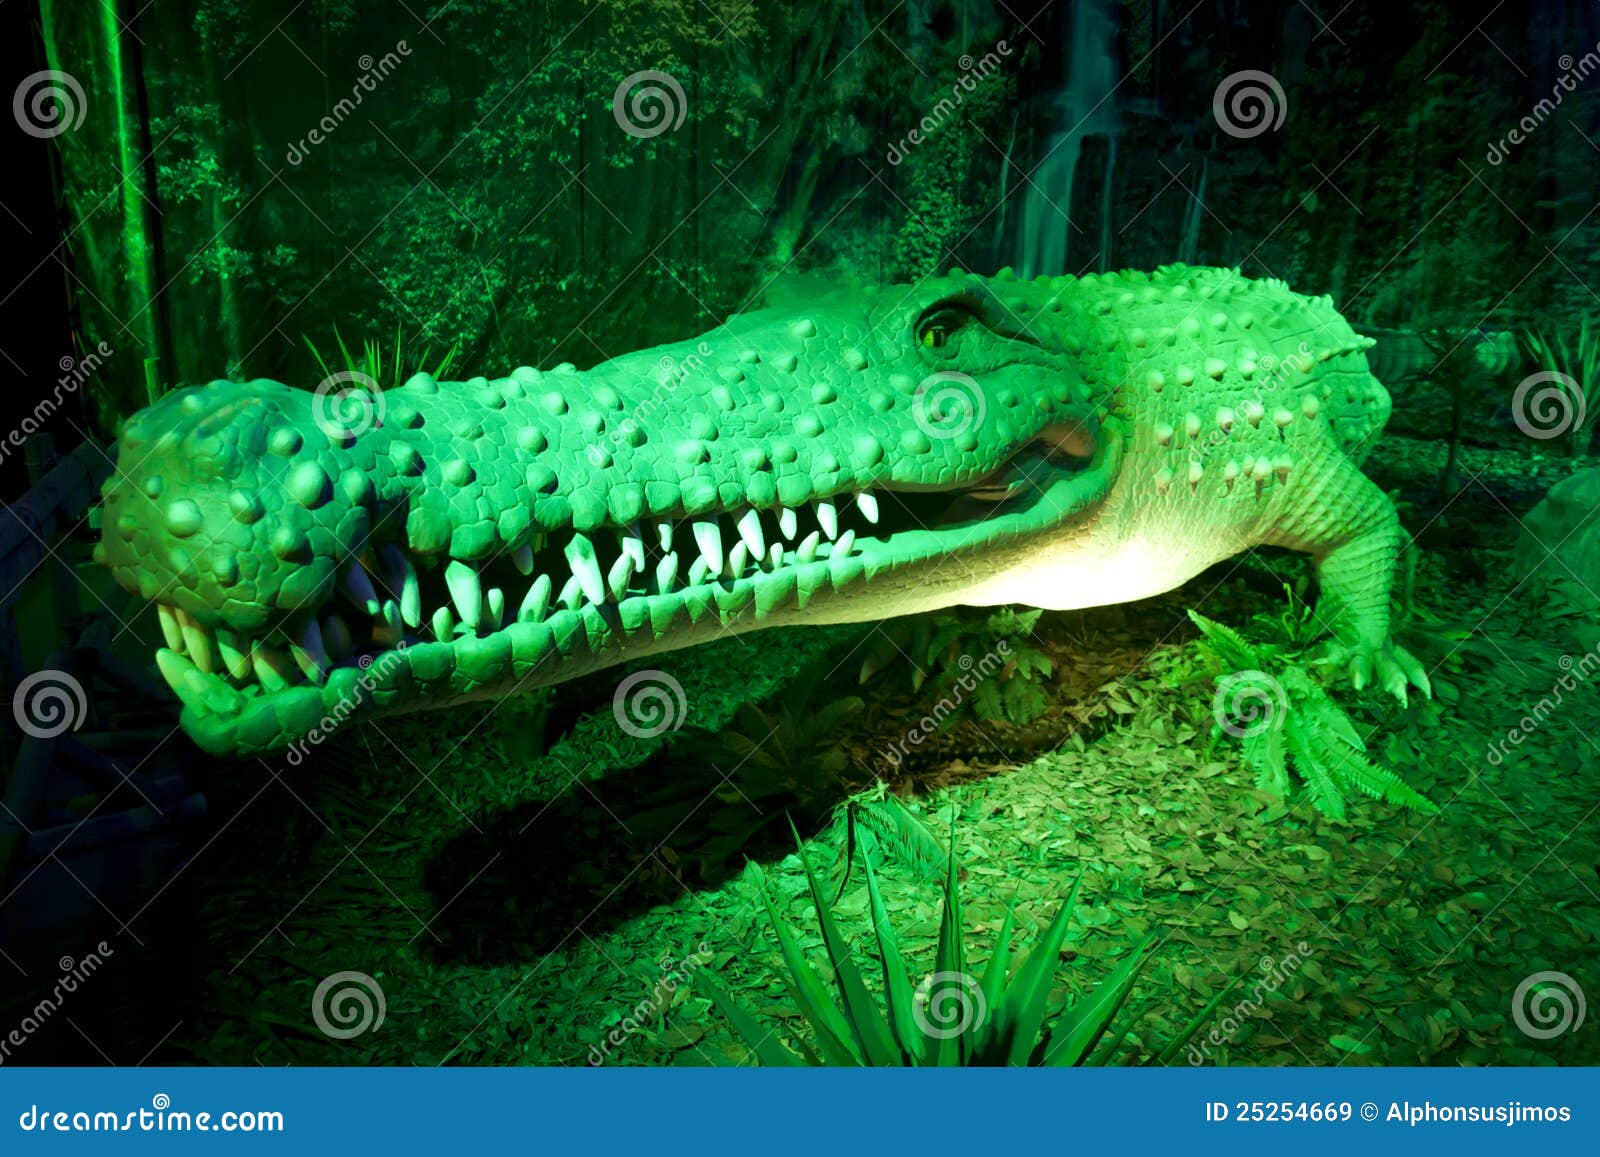 Deinosuchus Royalty-Free Images, Stock Photos & Pictures